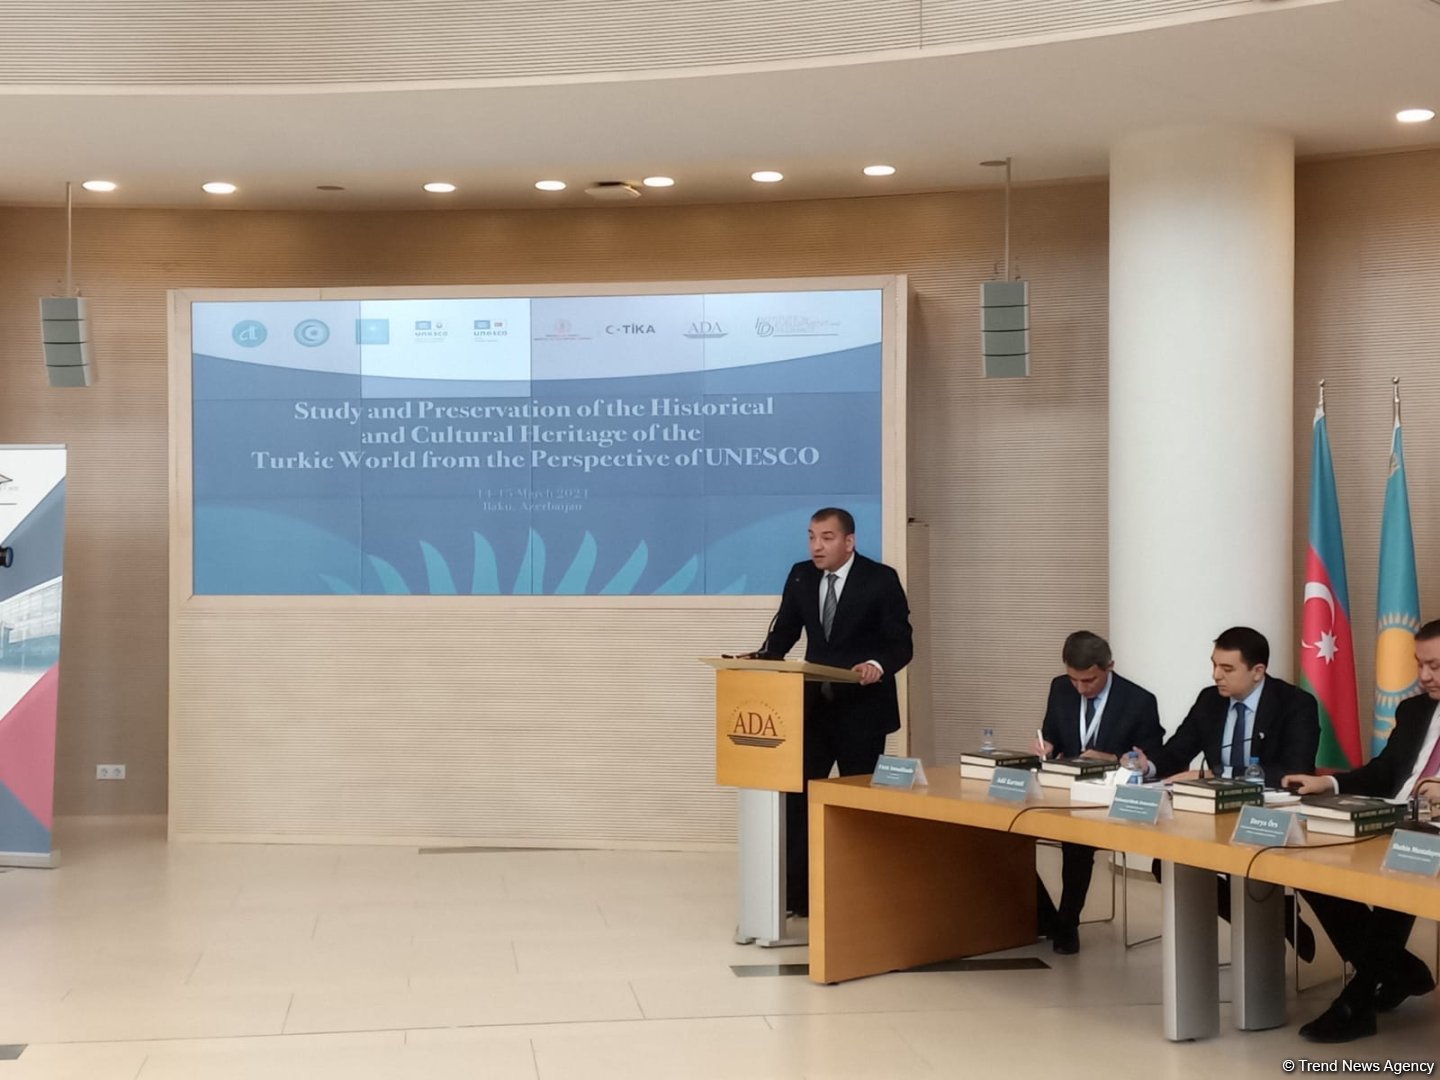 Azerbaijan urges Turkic nations for collaborative strategy to preserve Silk Road's cultural heritage